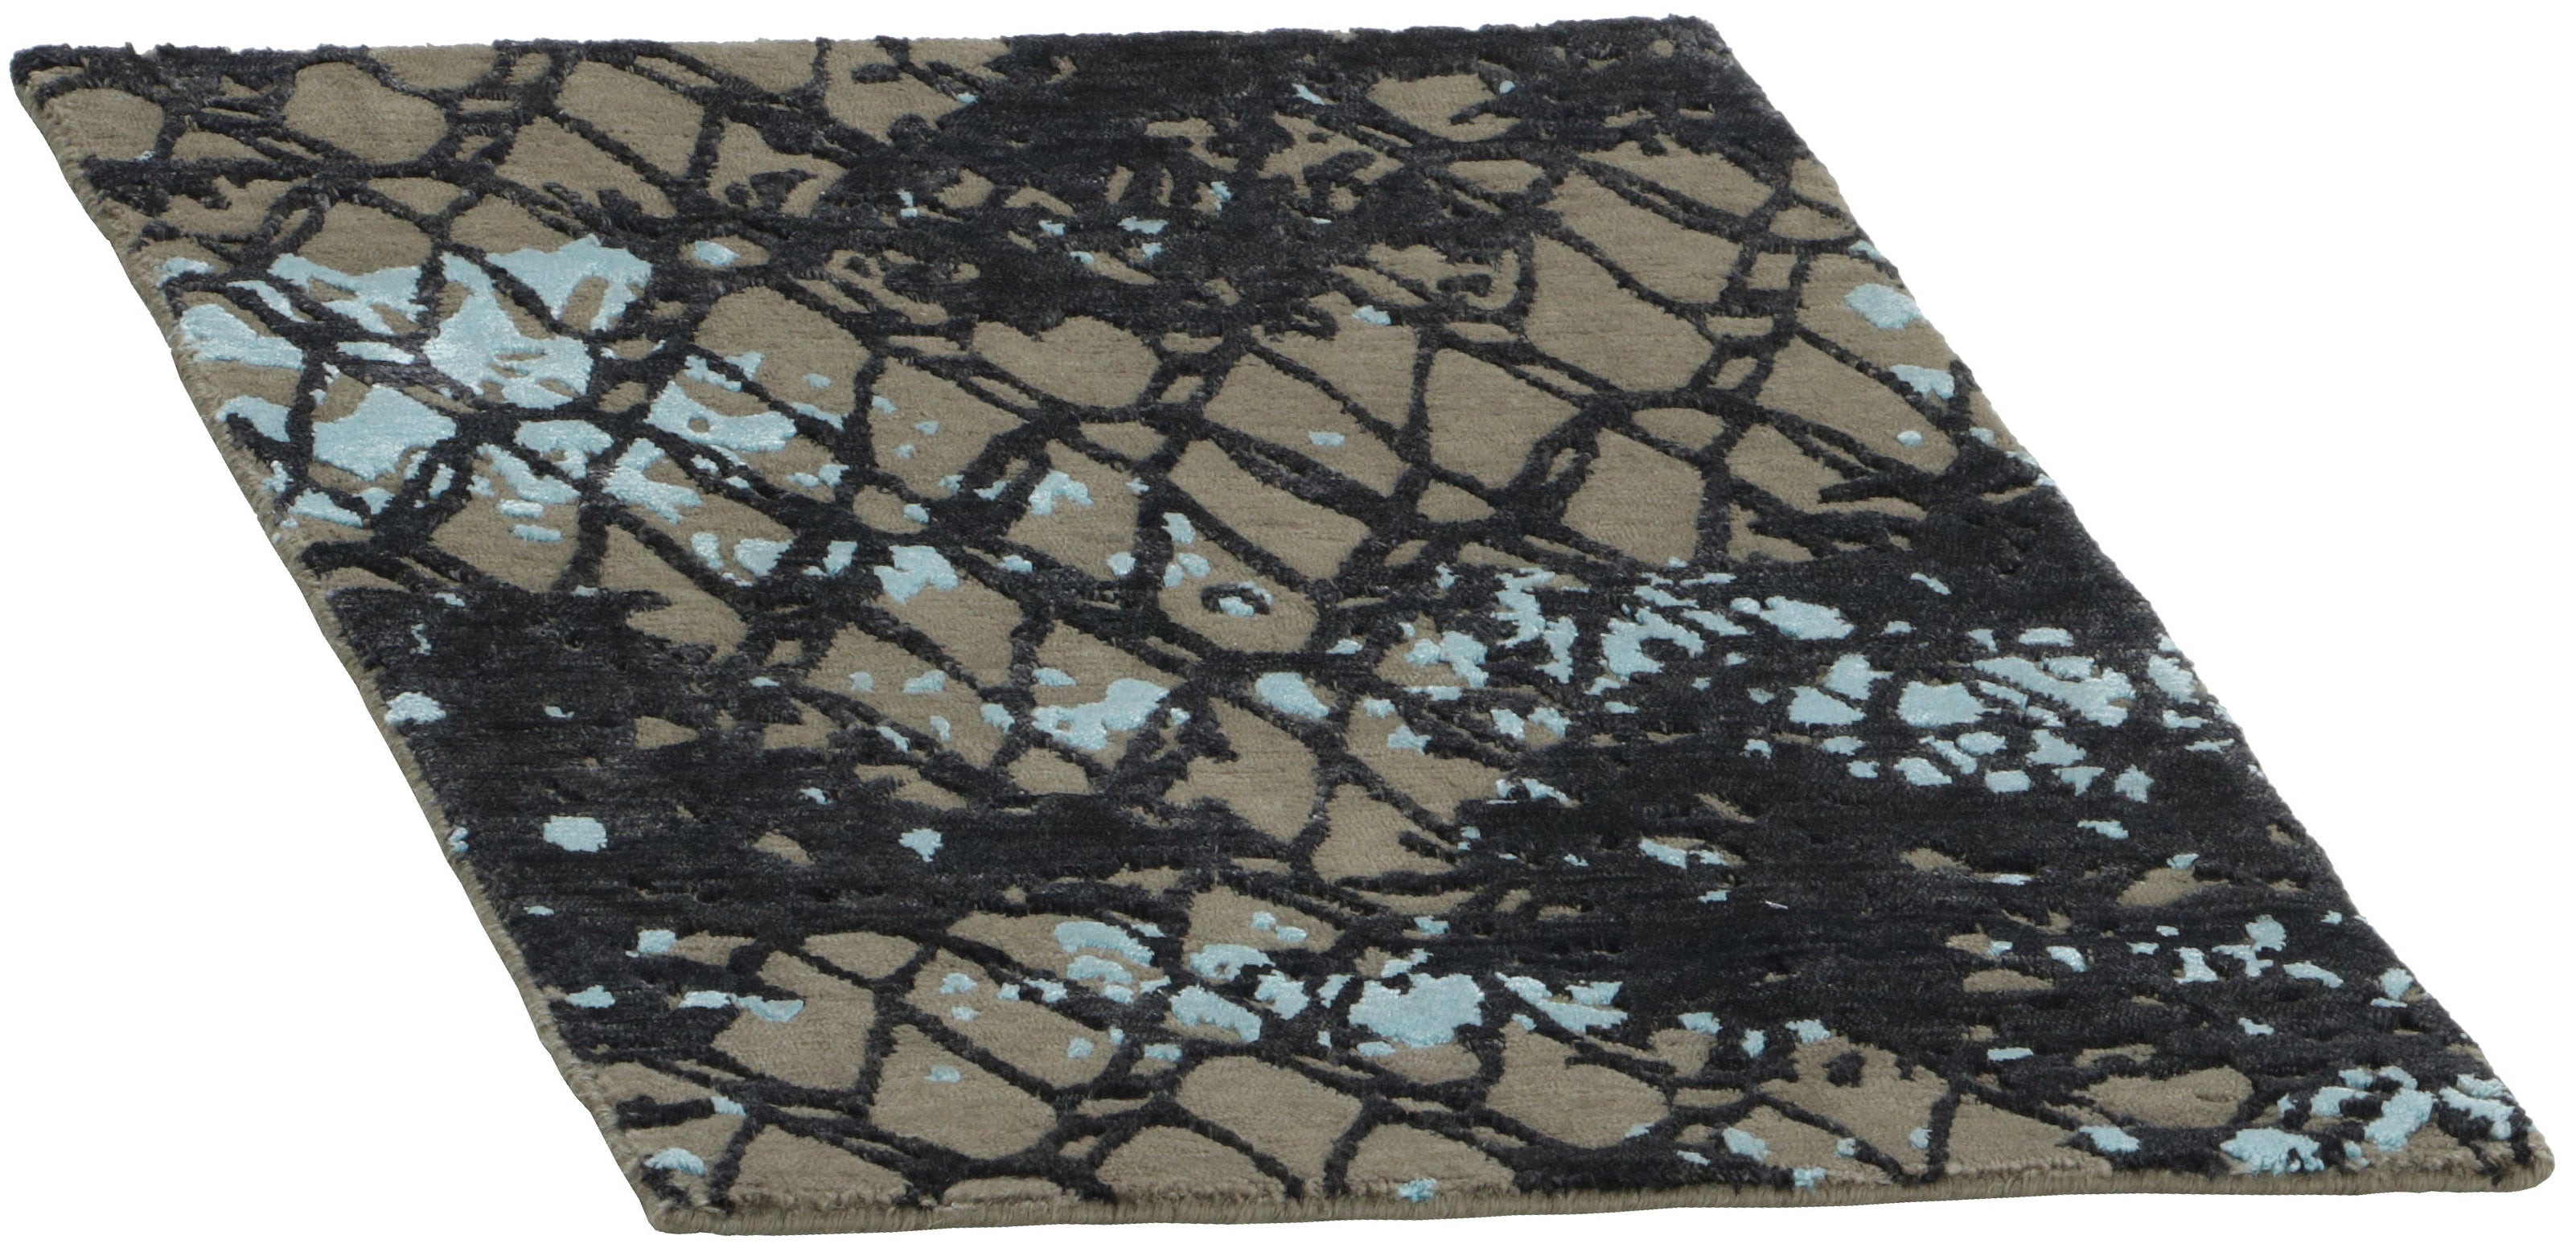 Area rug with abstract design in blue